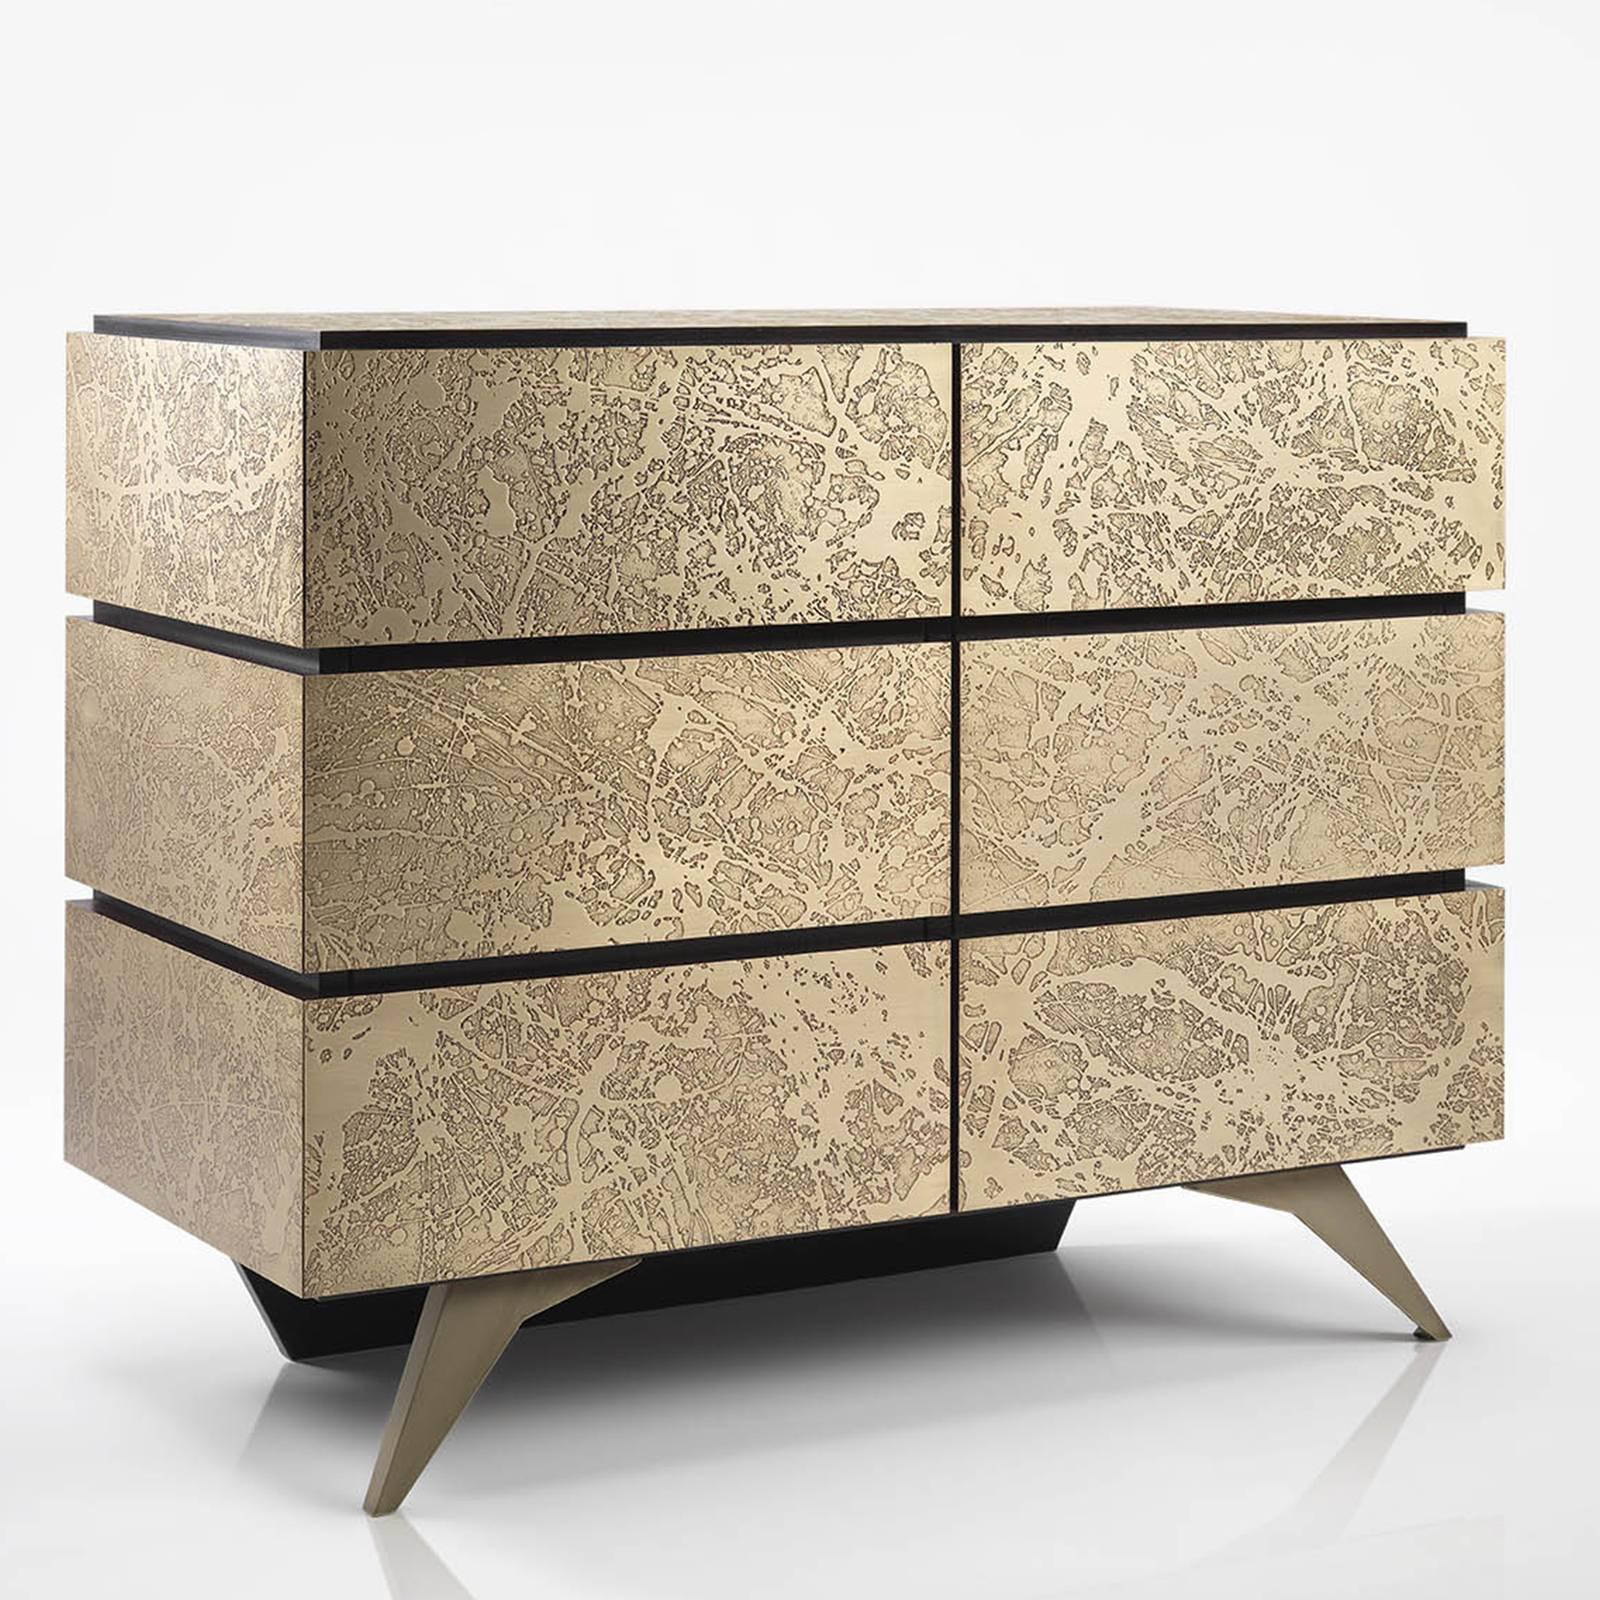 Striking and timeless, this exquisite sideboard will add luxury and style to a living room or dining room, thank to its Minimalist silhouette and the stunning details of its textured surface that play with the surrounding light unique ways. The